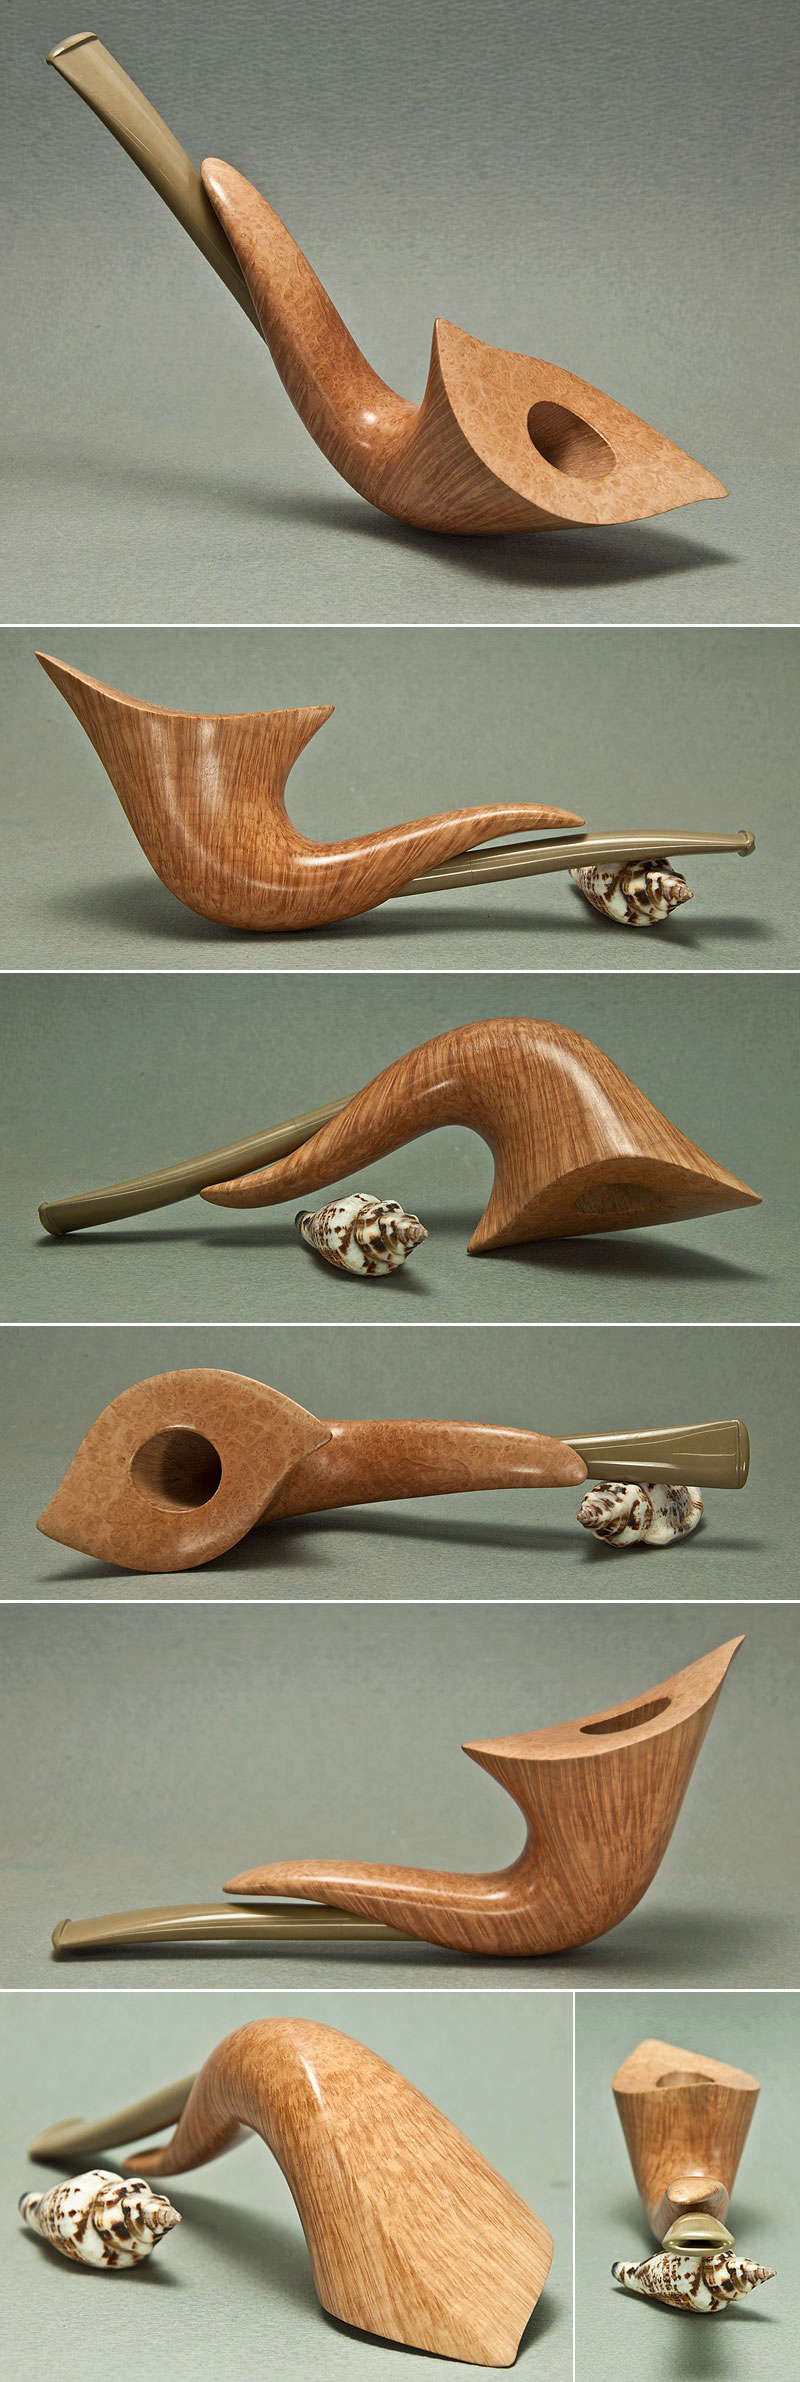 Les pipes bizarres...  - Page 2 199-2010